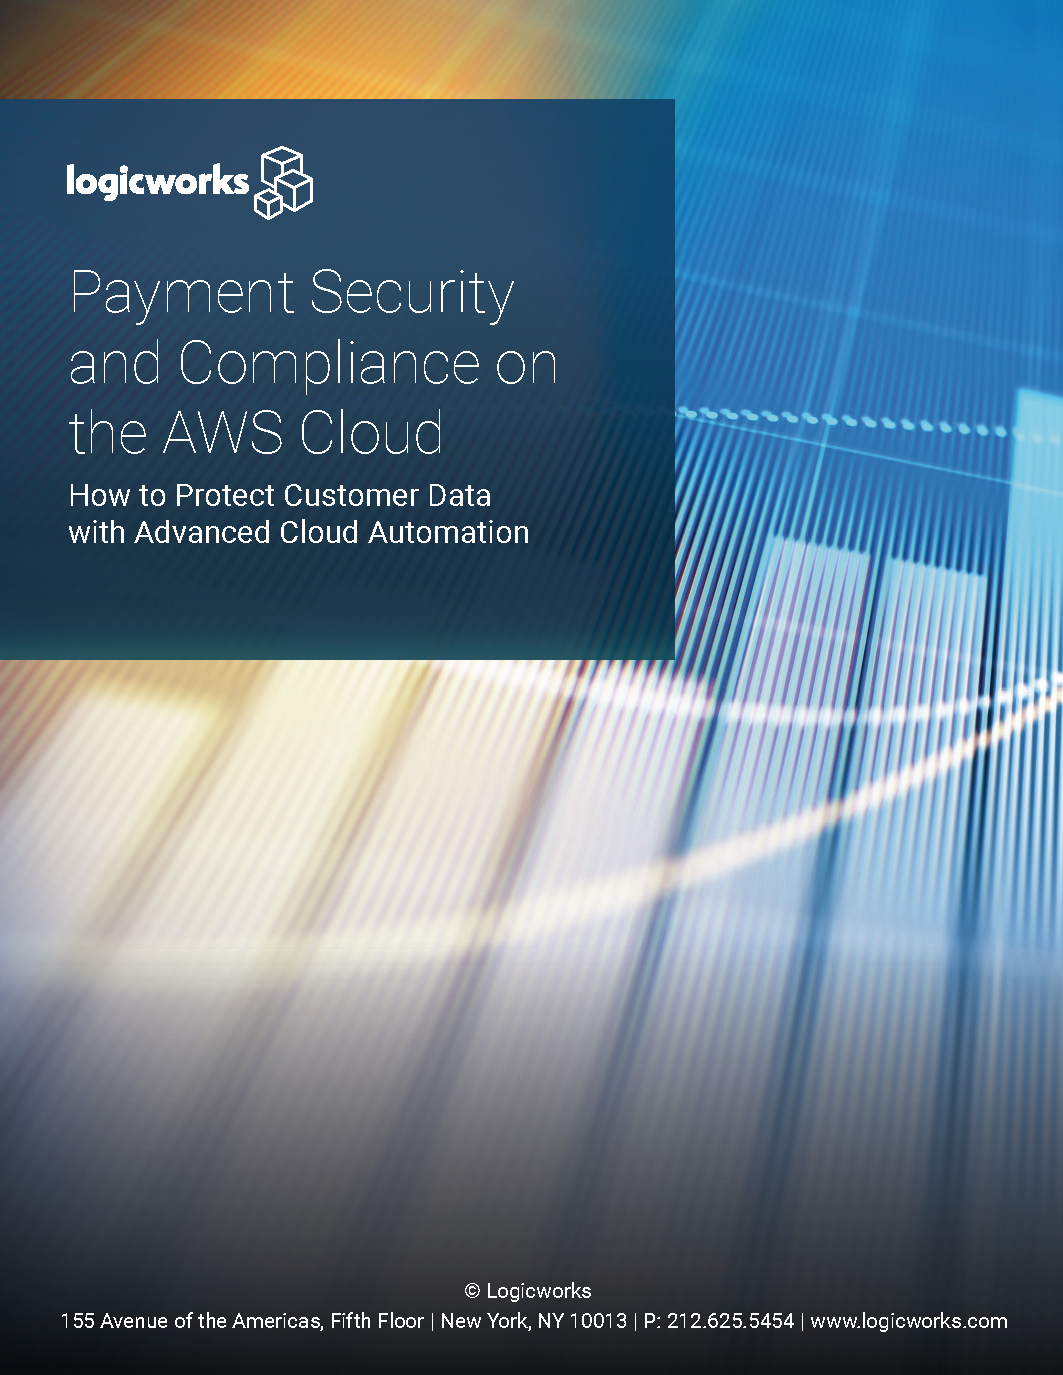 Logicworks eBook - Payment Security & Compliance on AWS